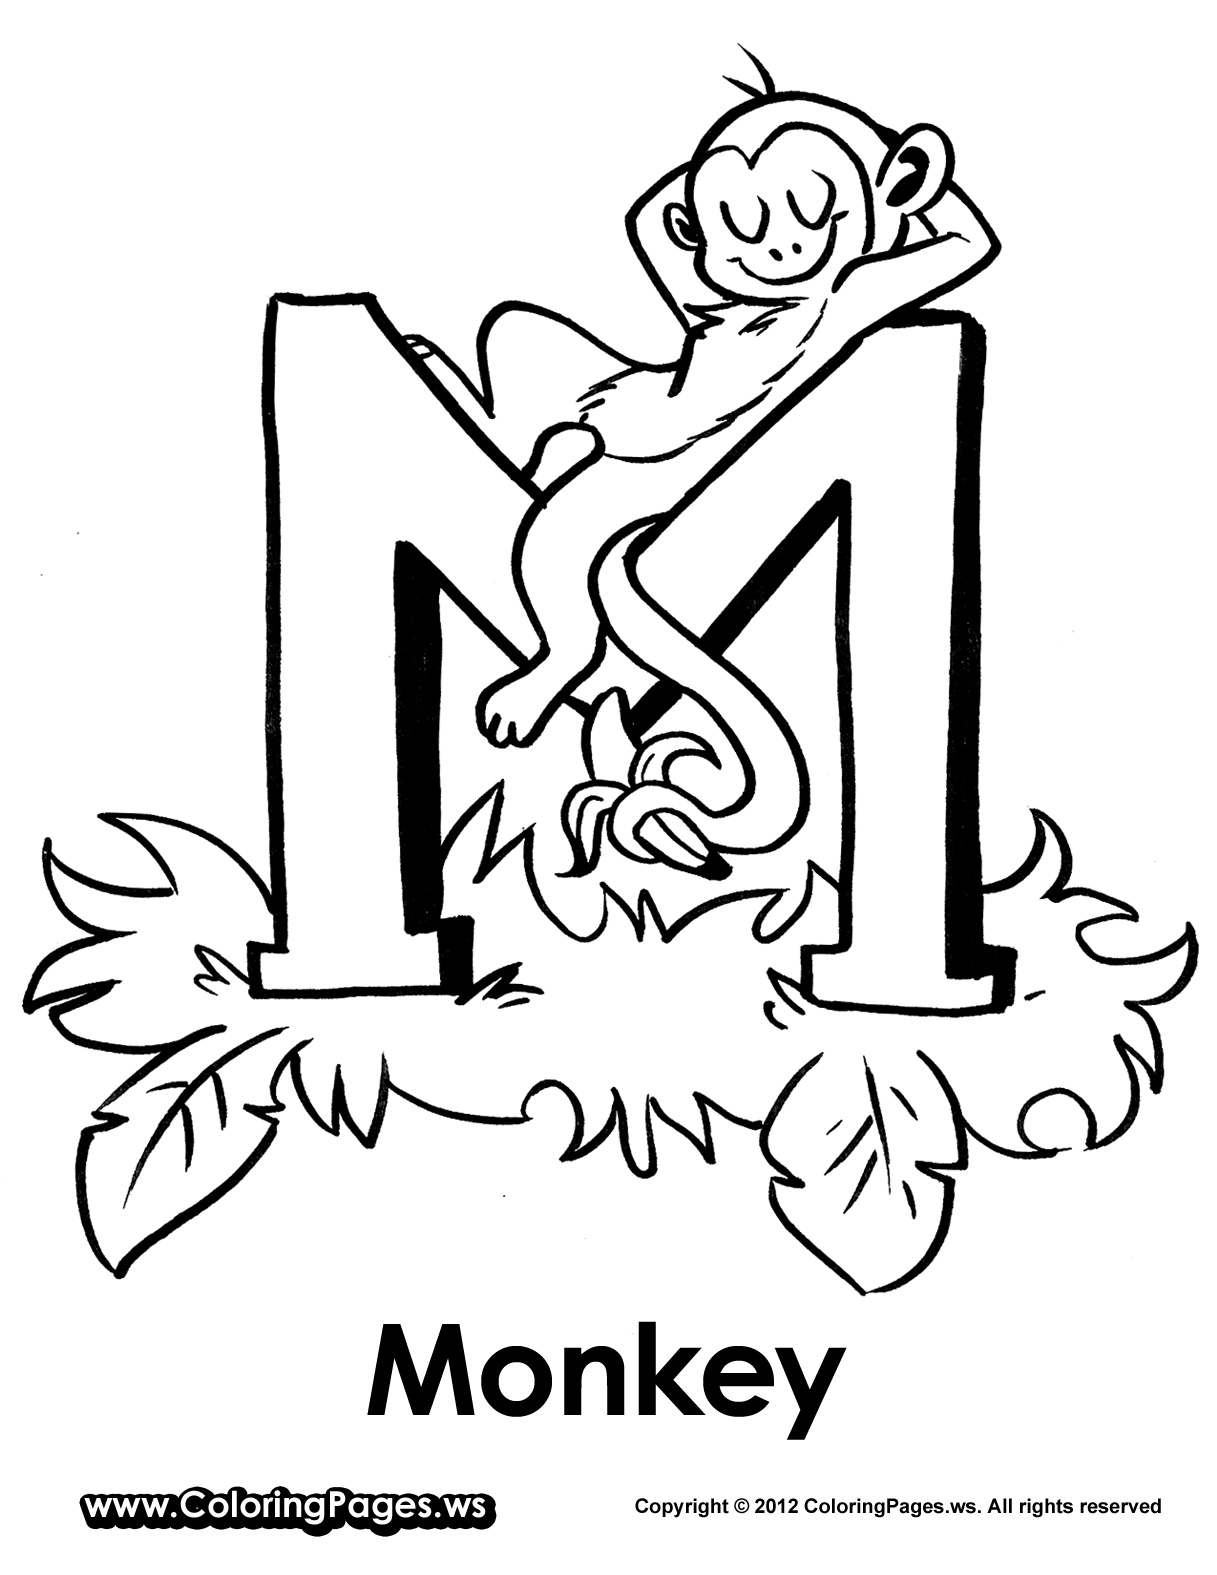 Monkey Coloring Pages | Love coloring pages | #19